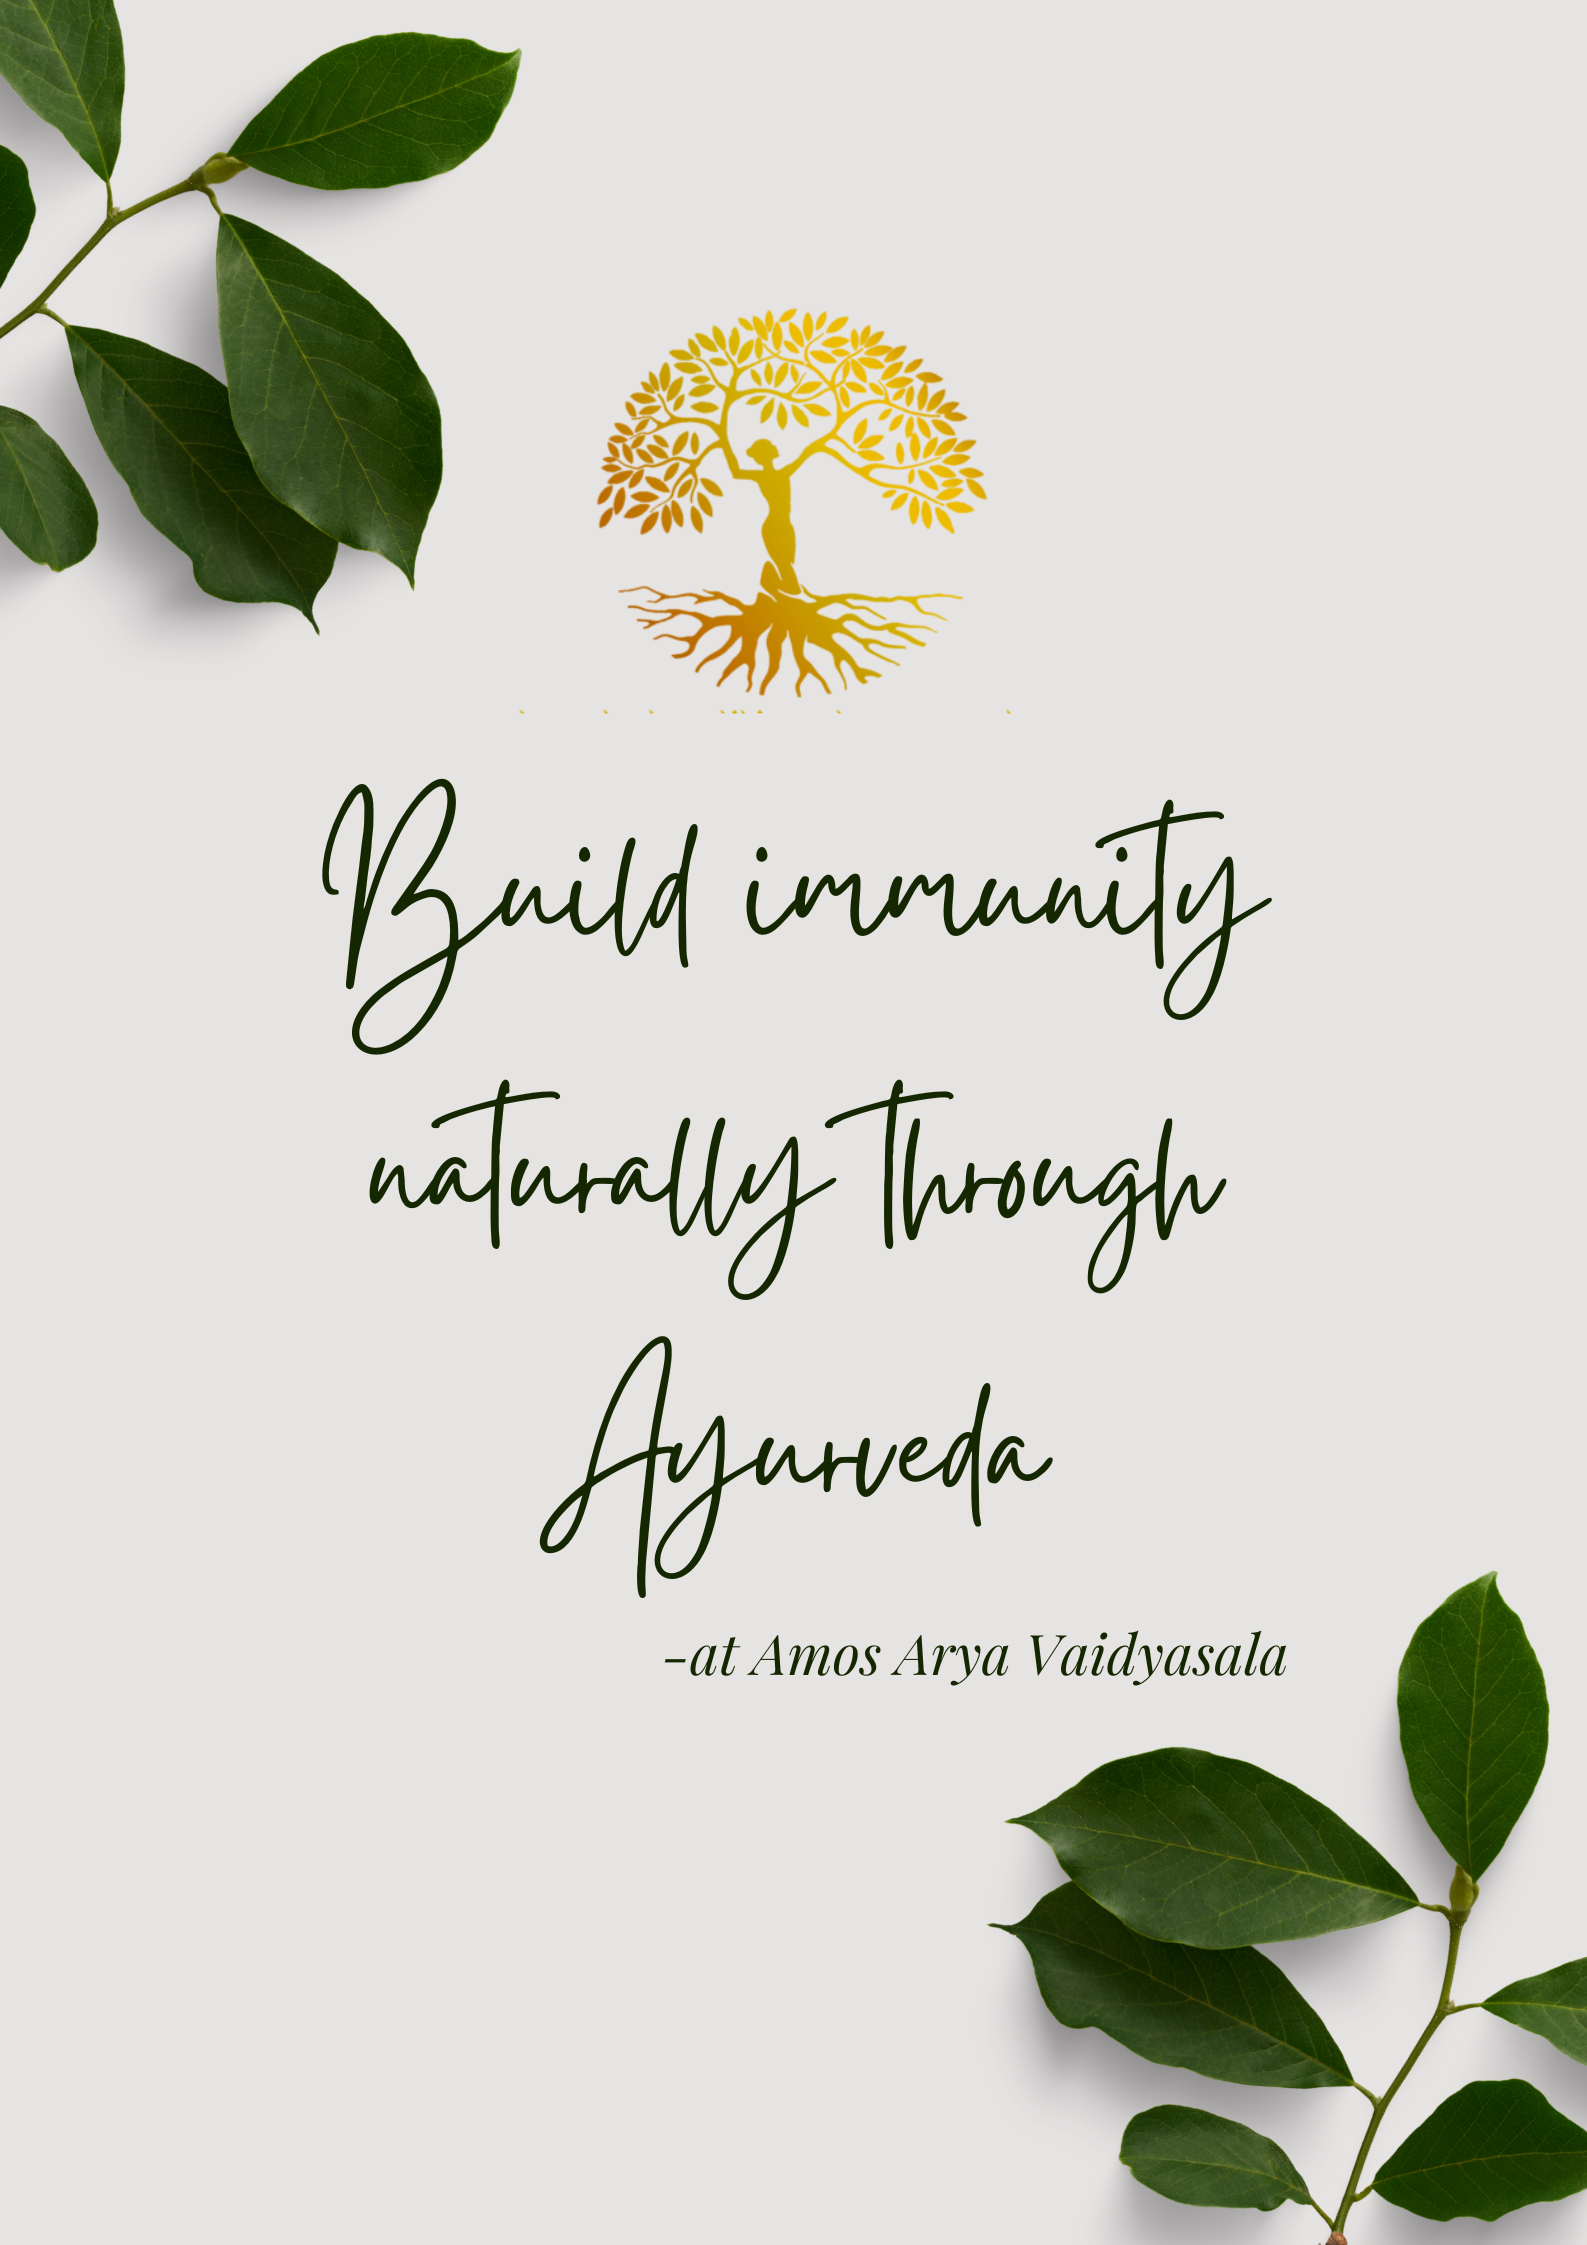 Get your immunity back naturally